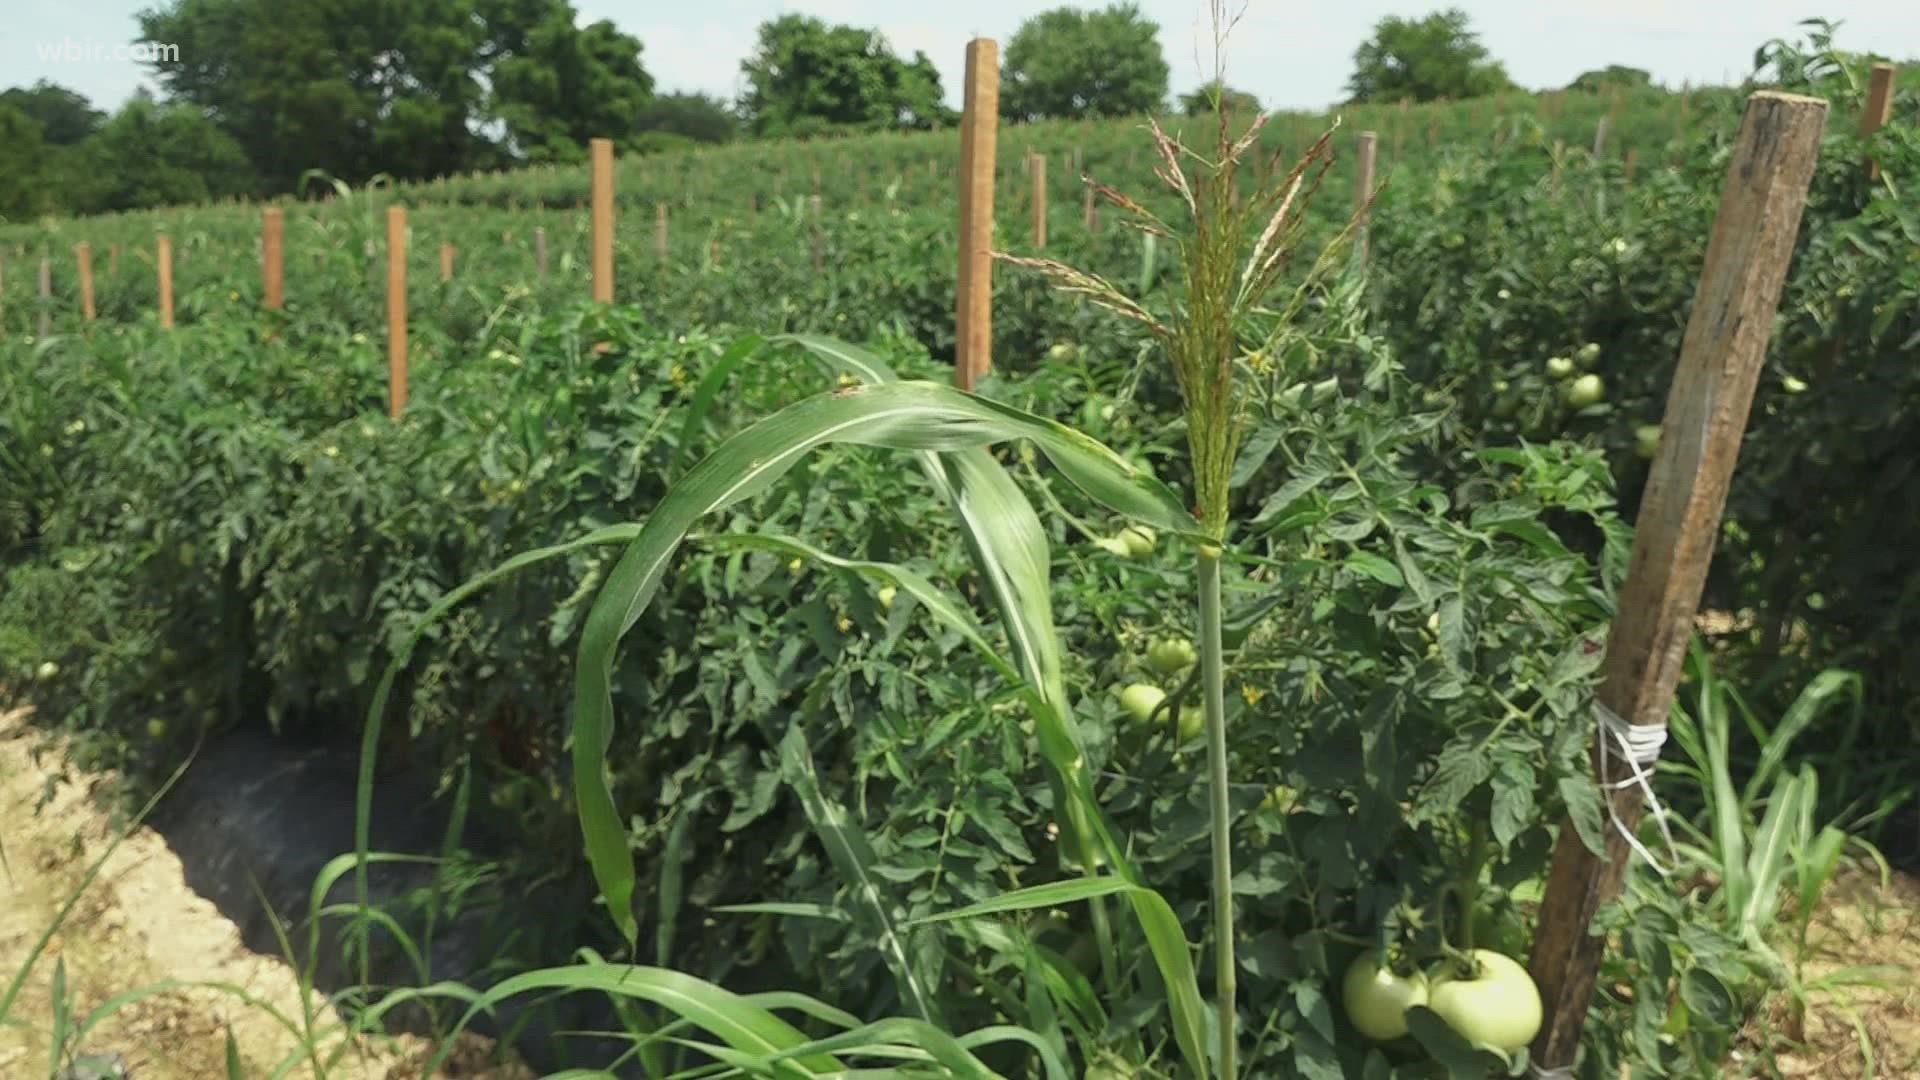 Typically, rain can help farmers grow their crops. But too much of it can harm them, causing a blight on some plants.